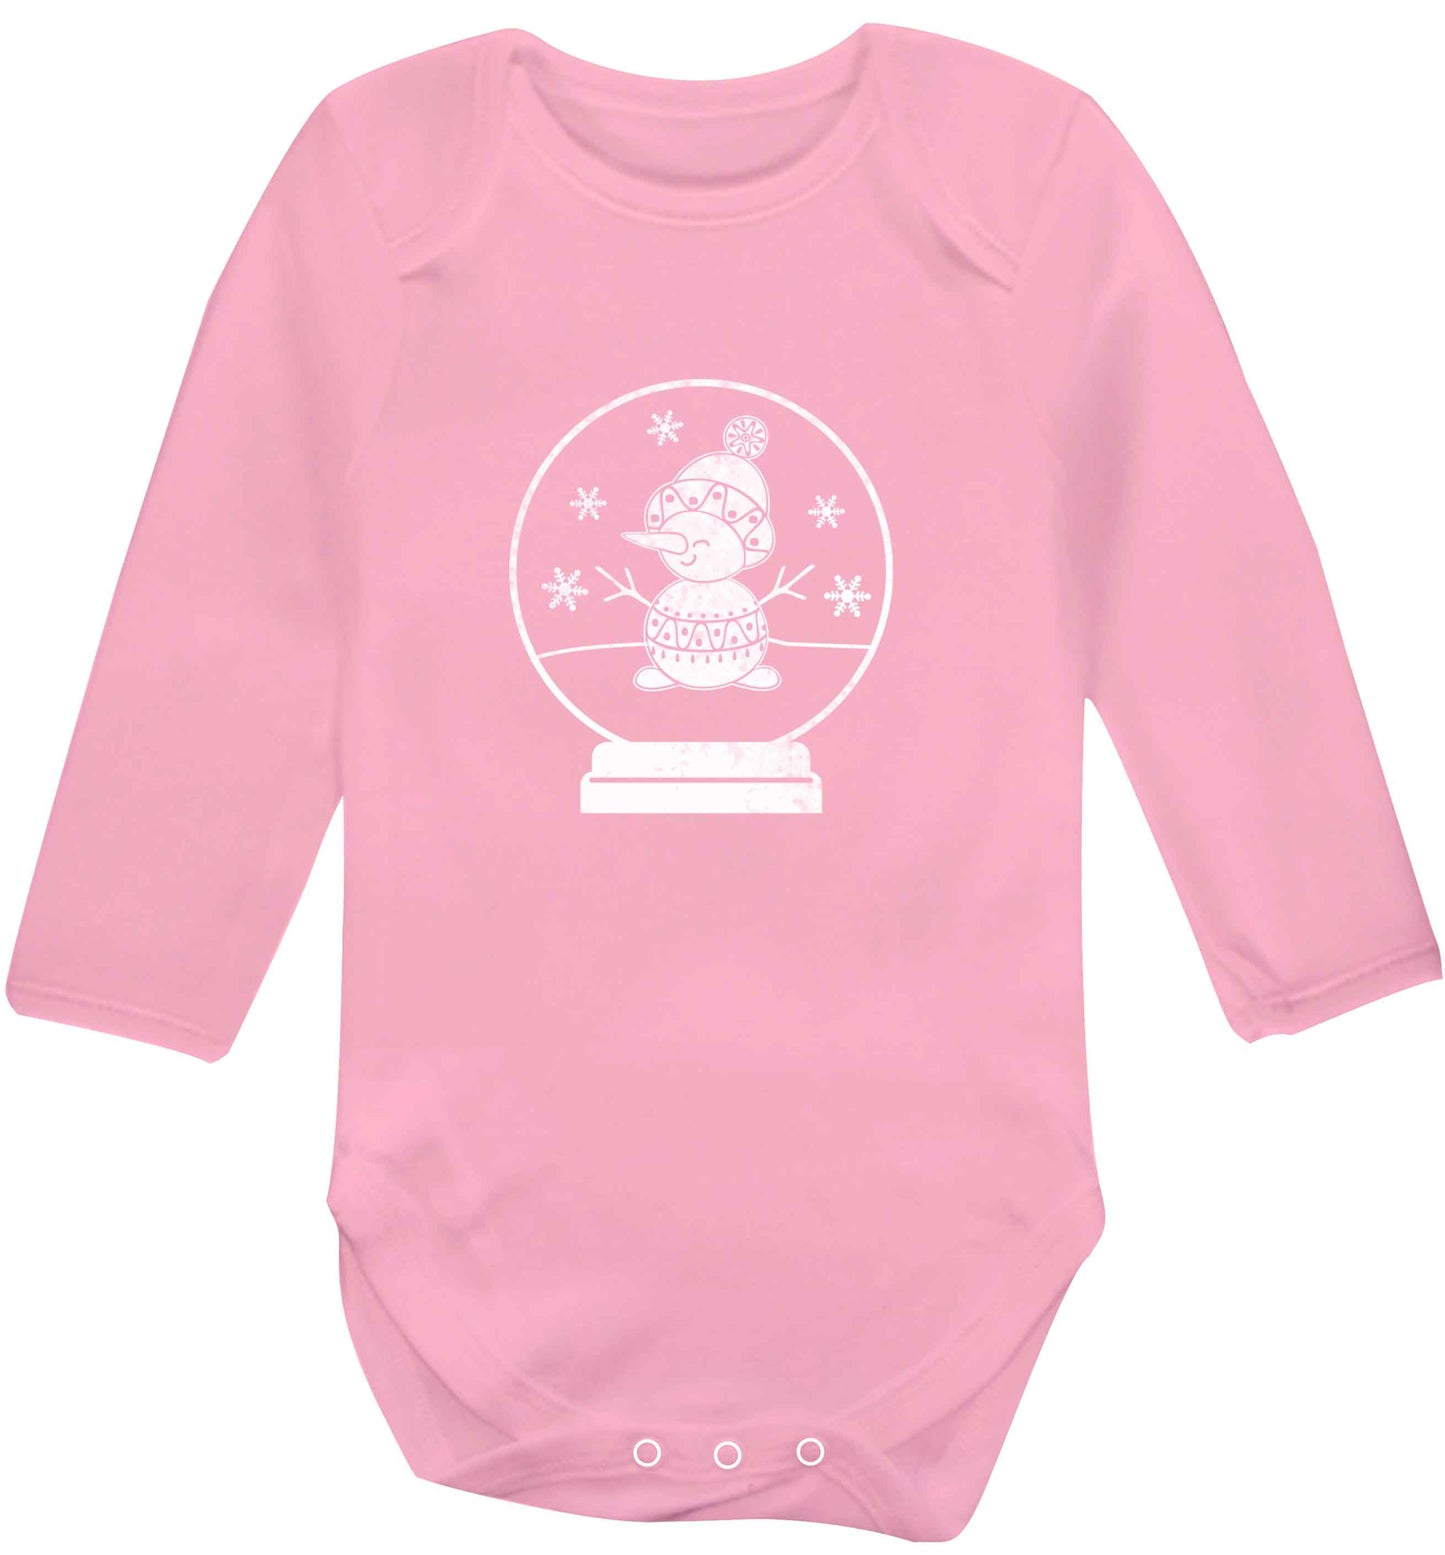 Snowman Snowglobe baby vest long sleeved pale pink 6-12 months